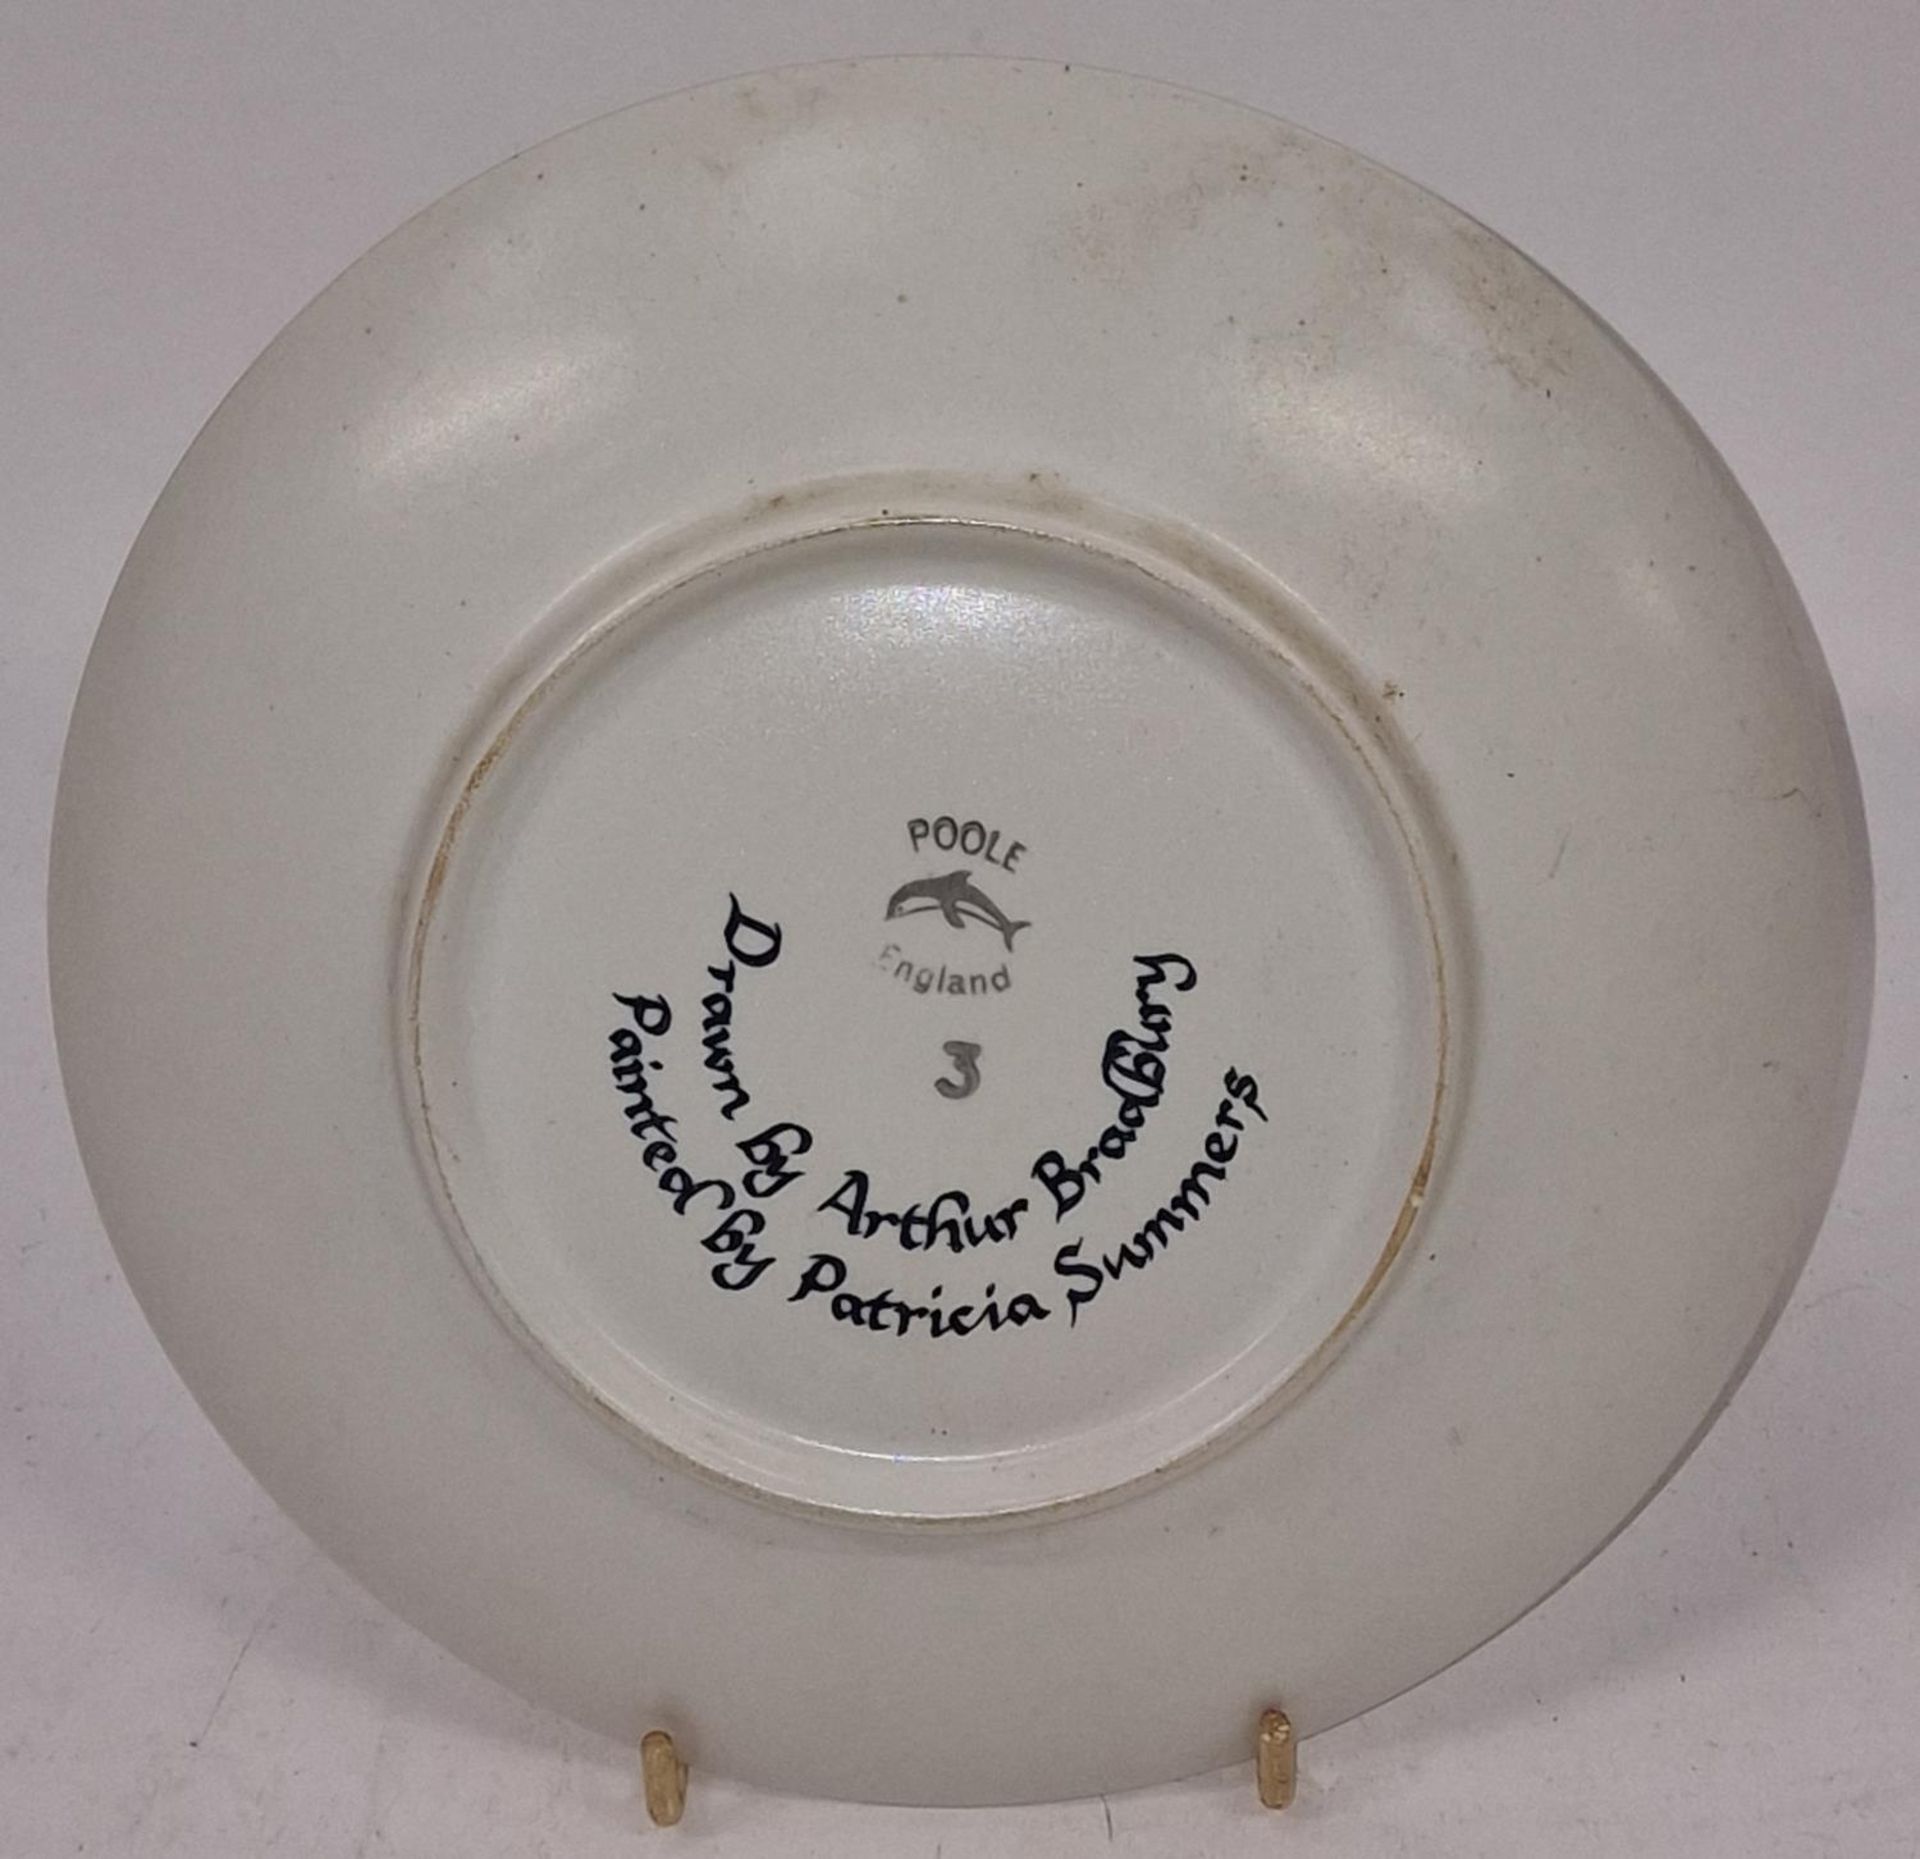 Poole Pottery Poole Whaler 1783 Frank Cup Runner up 1971 plate 8" diameter. - Image 3 of 3